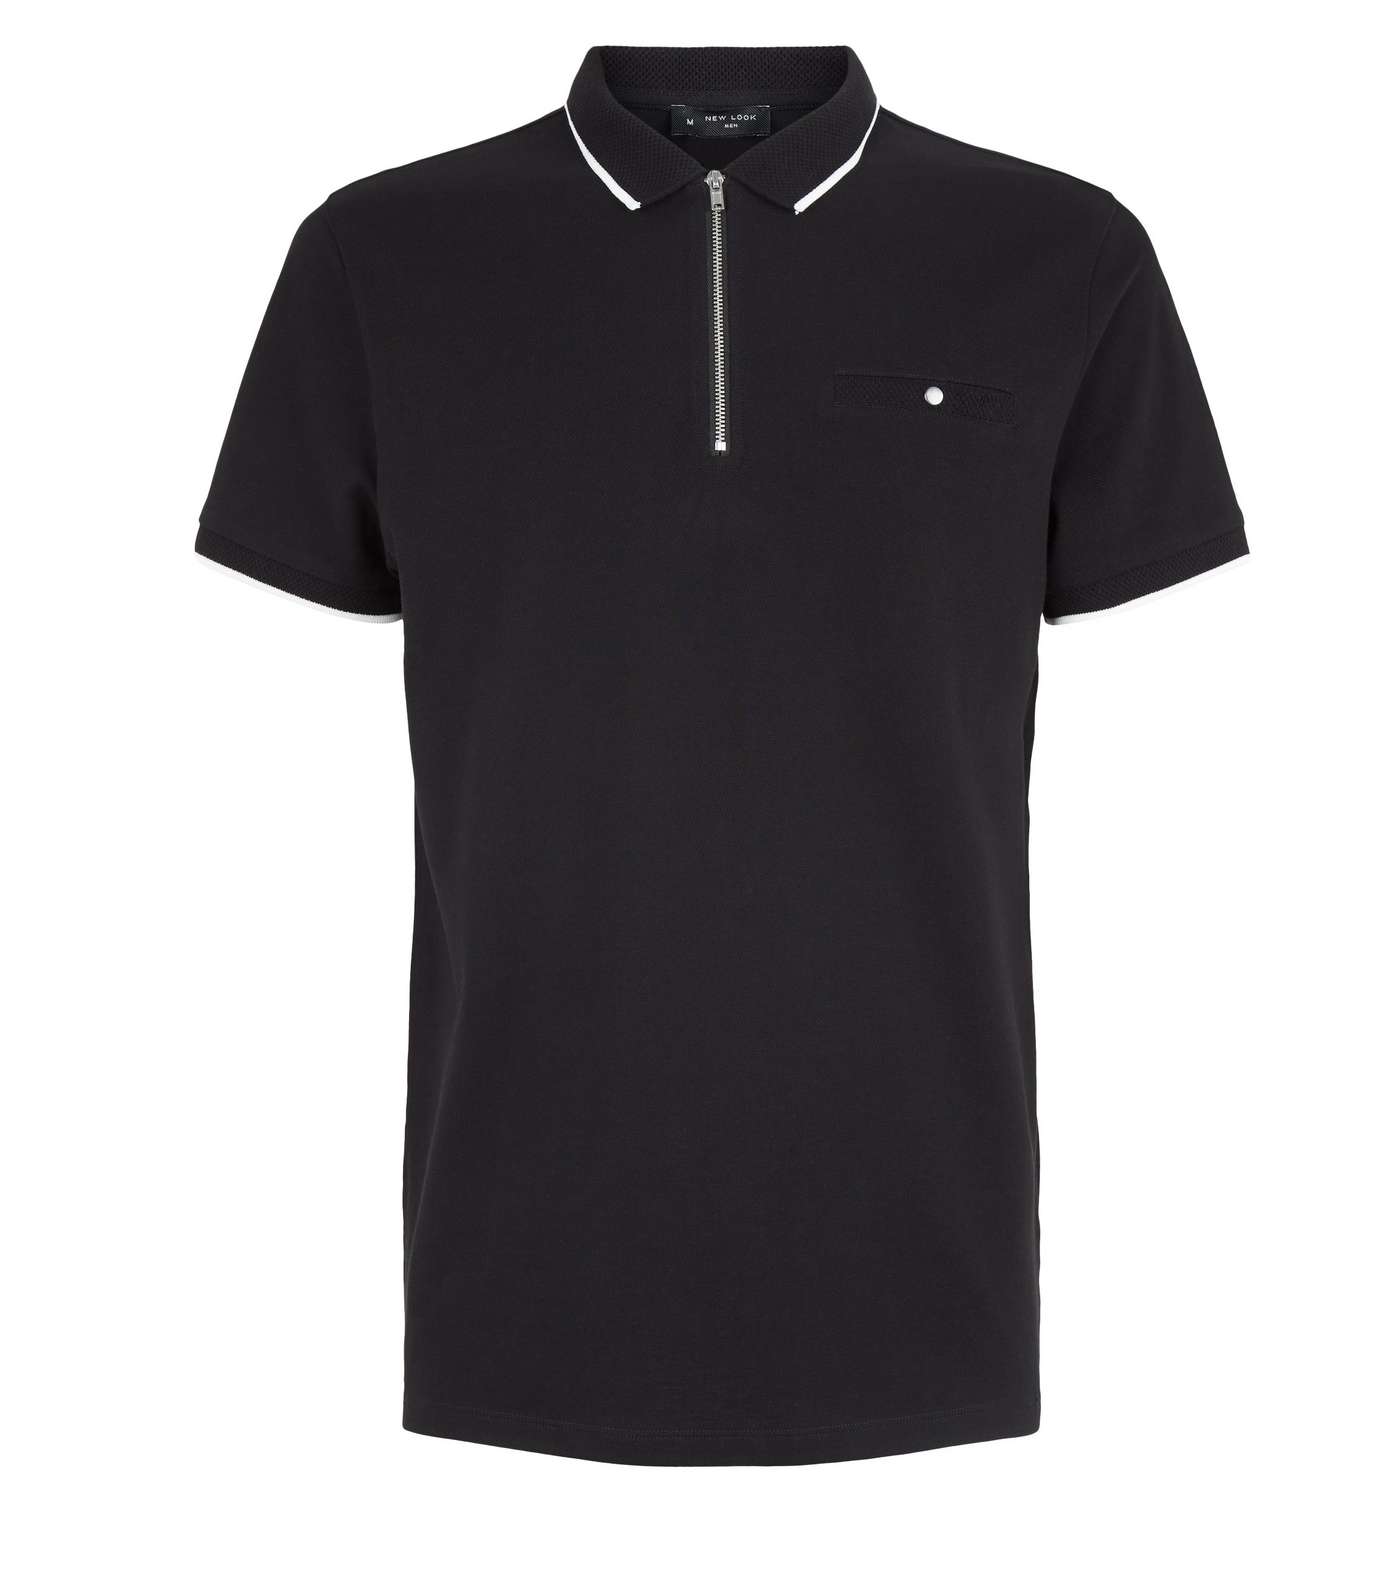 Black Tipped Zip Front Polo Shirt Image 4